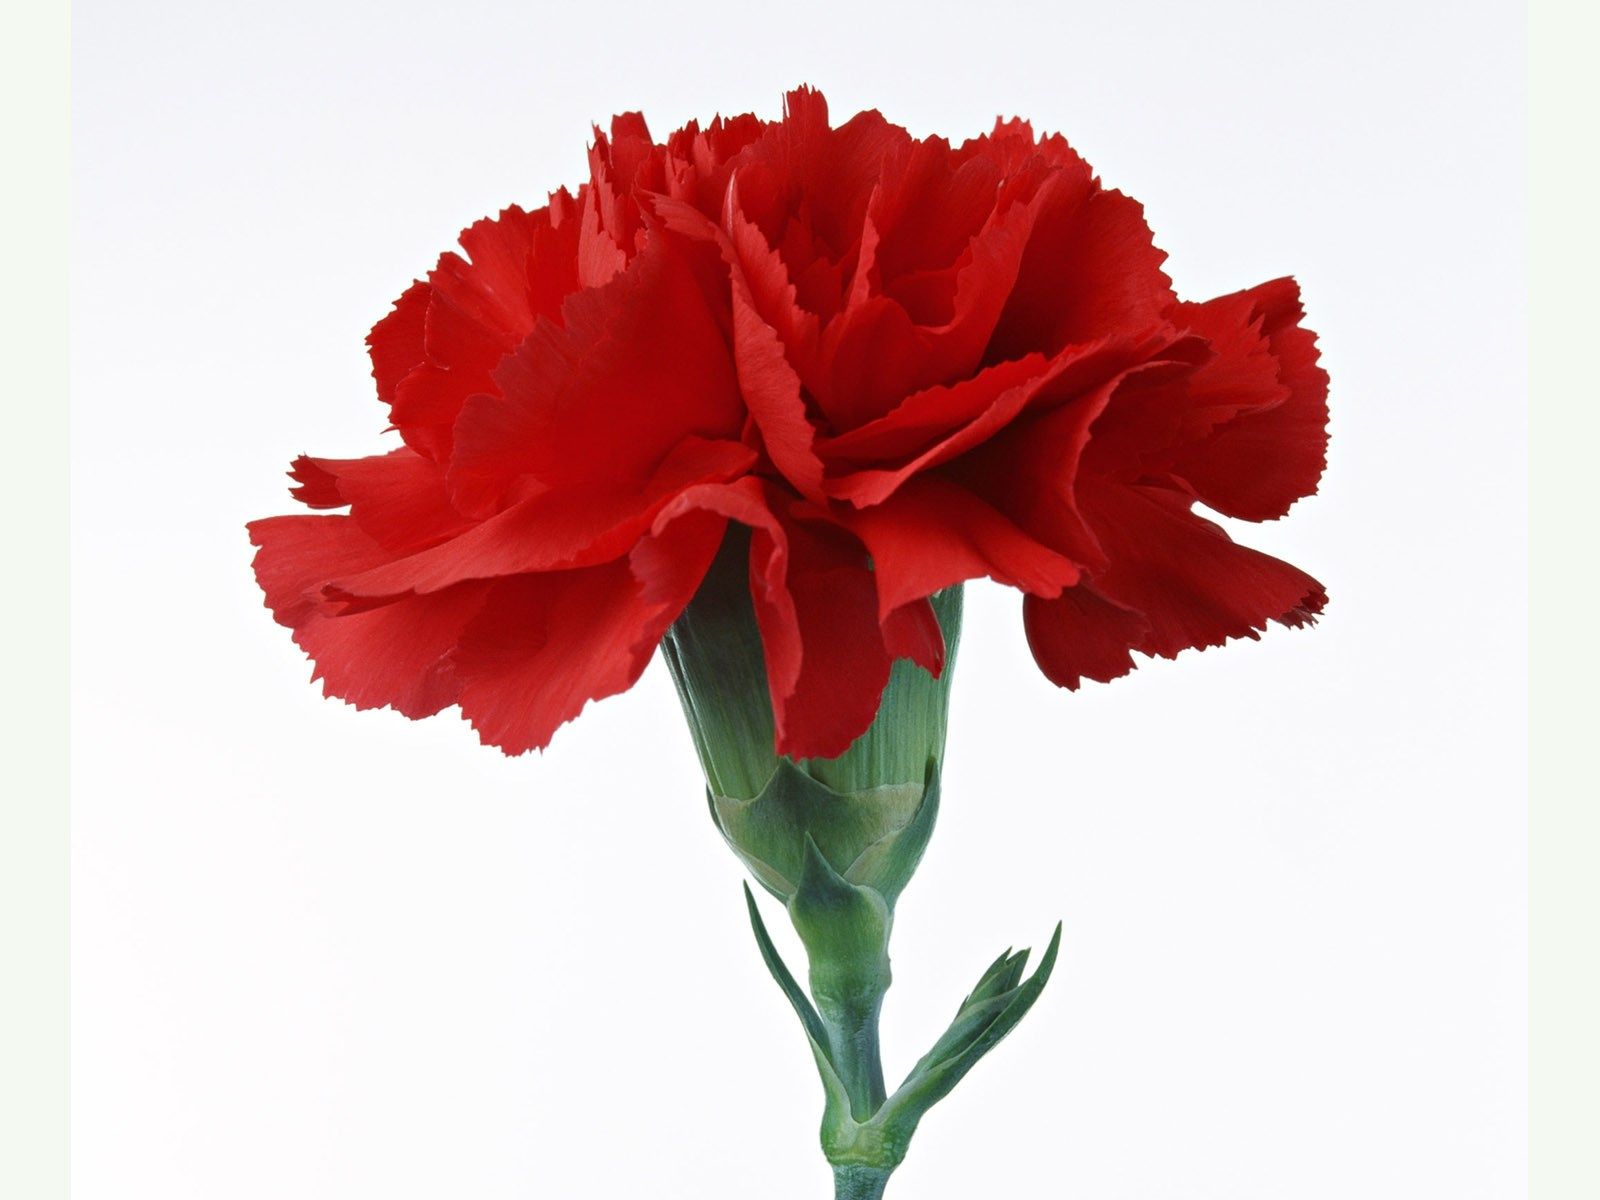 The red carnation is also the symbol of the Portuguese Carnation Revolution. Description from what